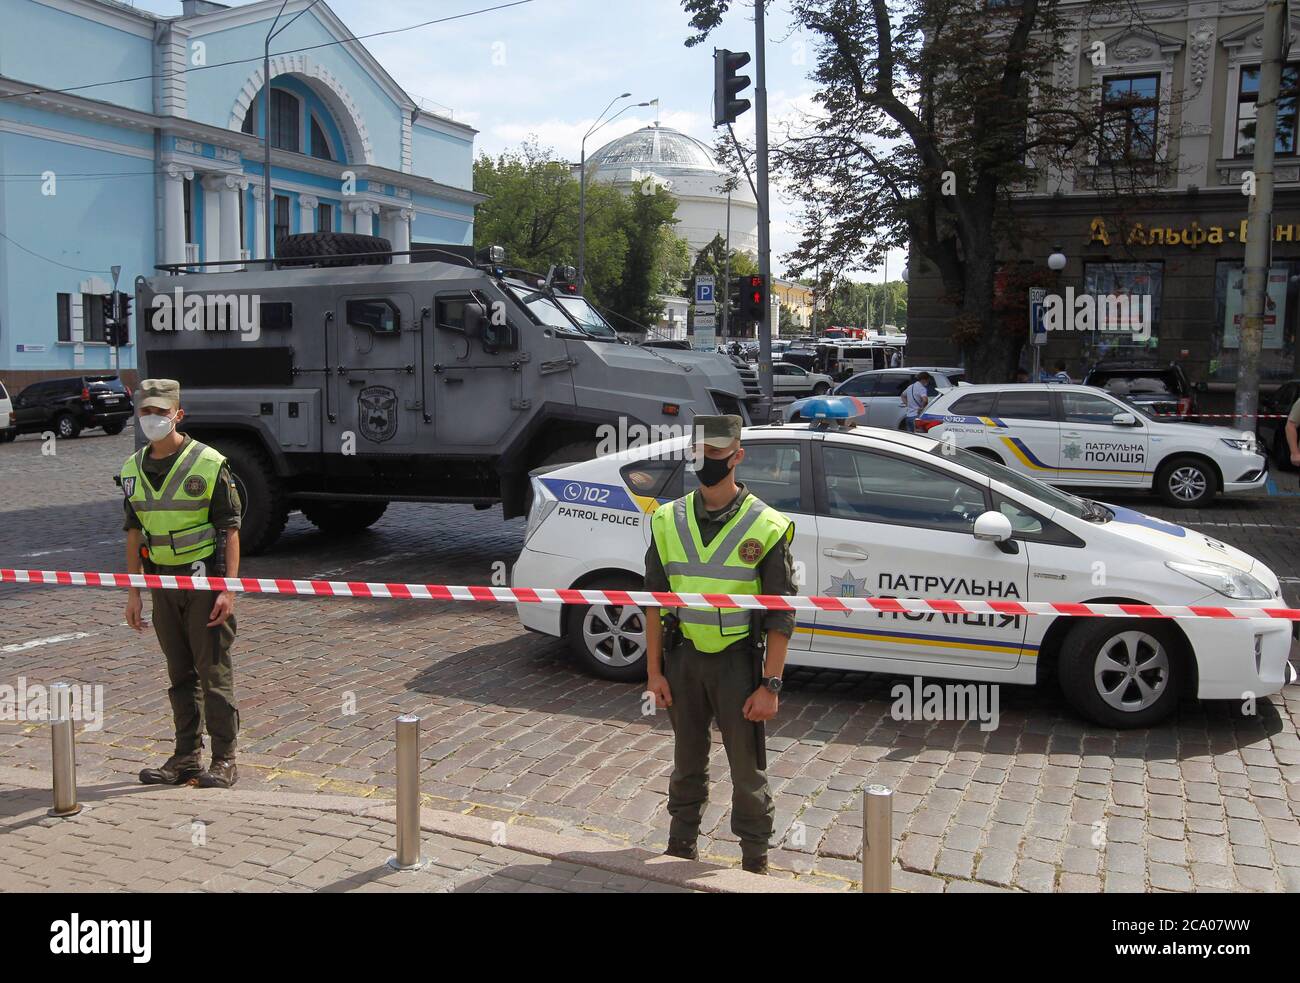 Kiev, Ukraine. 3rd Aug, 2020. National guard soldiers stand guard near the building where an unidentified man threatens to blow up a bomb at the Universal bank office in Kiev, Ukraine, on 3 August 2020. The SBU Security Service of Ukraine's specops unit detained Uzbekistan citizen who threatened to blow up a bank office in the capital city of Kiev, according to media. Credit: Serg Glovny/ZUMA Wire/Alamy Live News Stock Photo